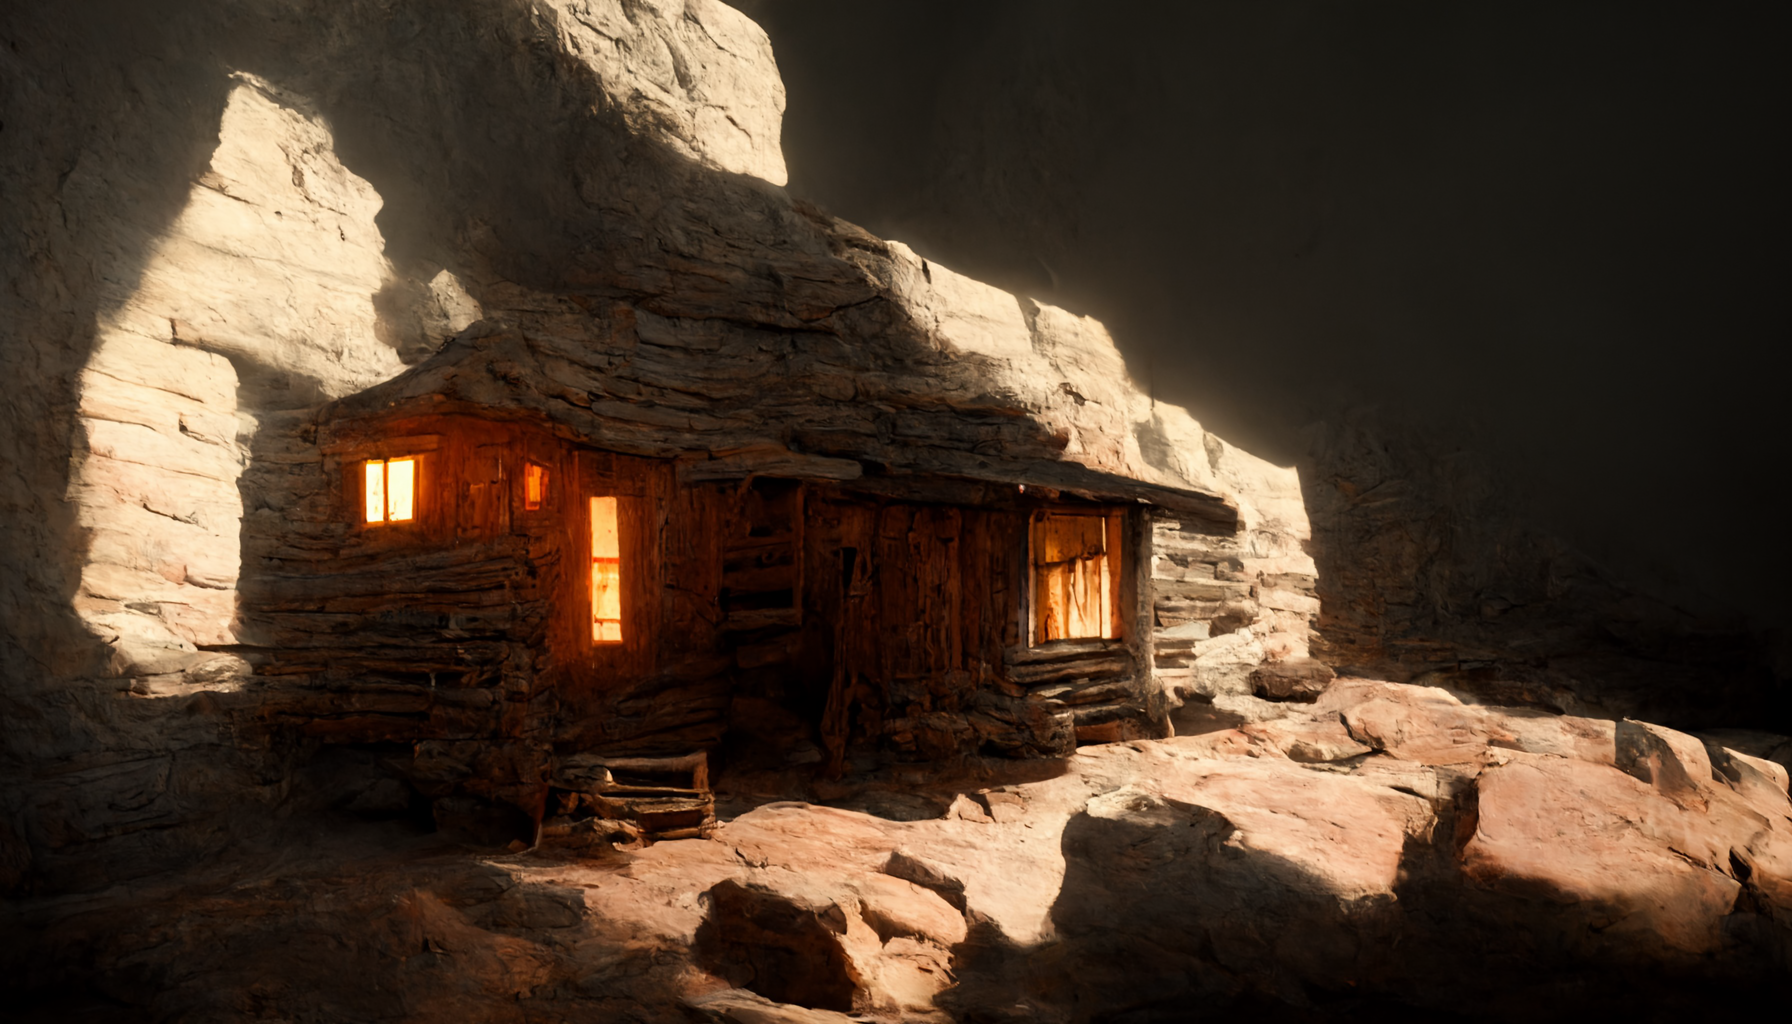 Displaying a file named Grunderwear_united_states_1880_old_miners_cabin_ebedded_in_moun_88894eac-5183-4f5e-a5a1-ccb4d38bbe69.png